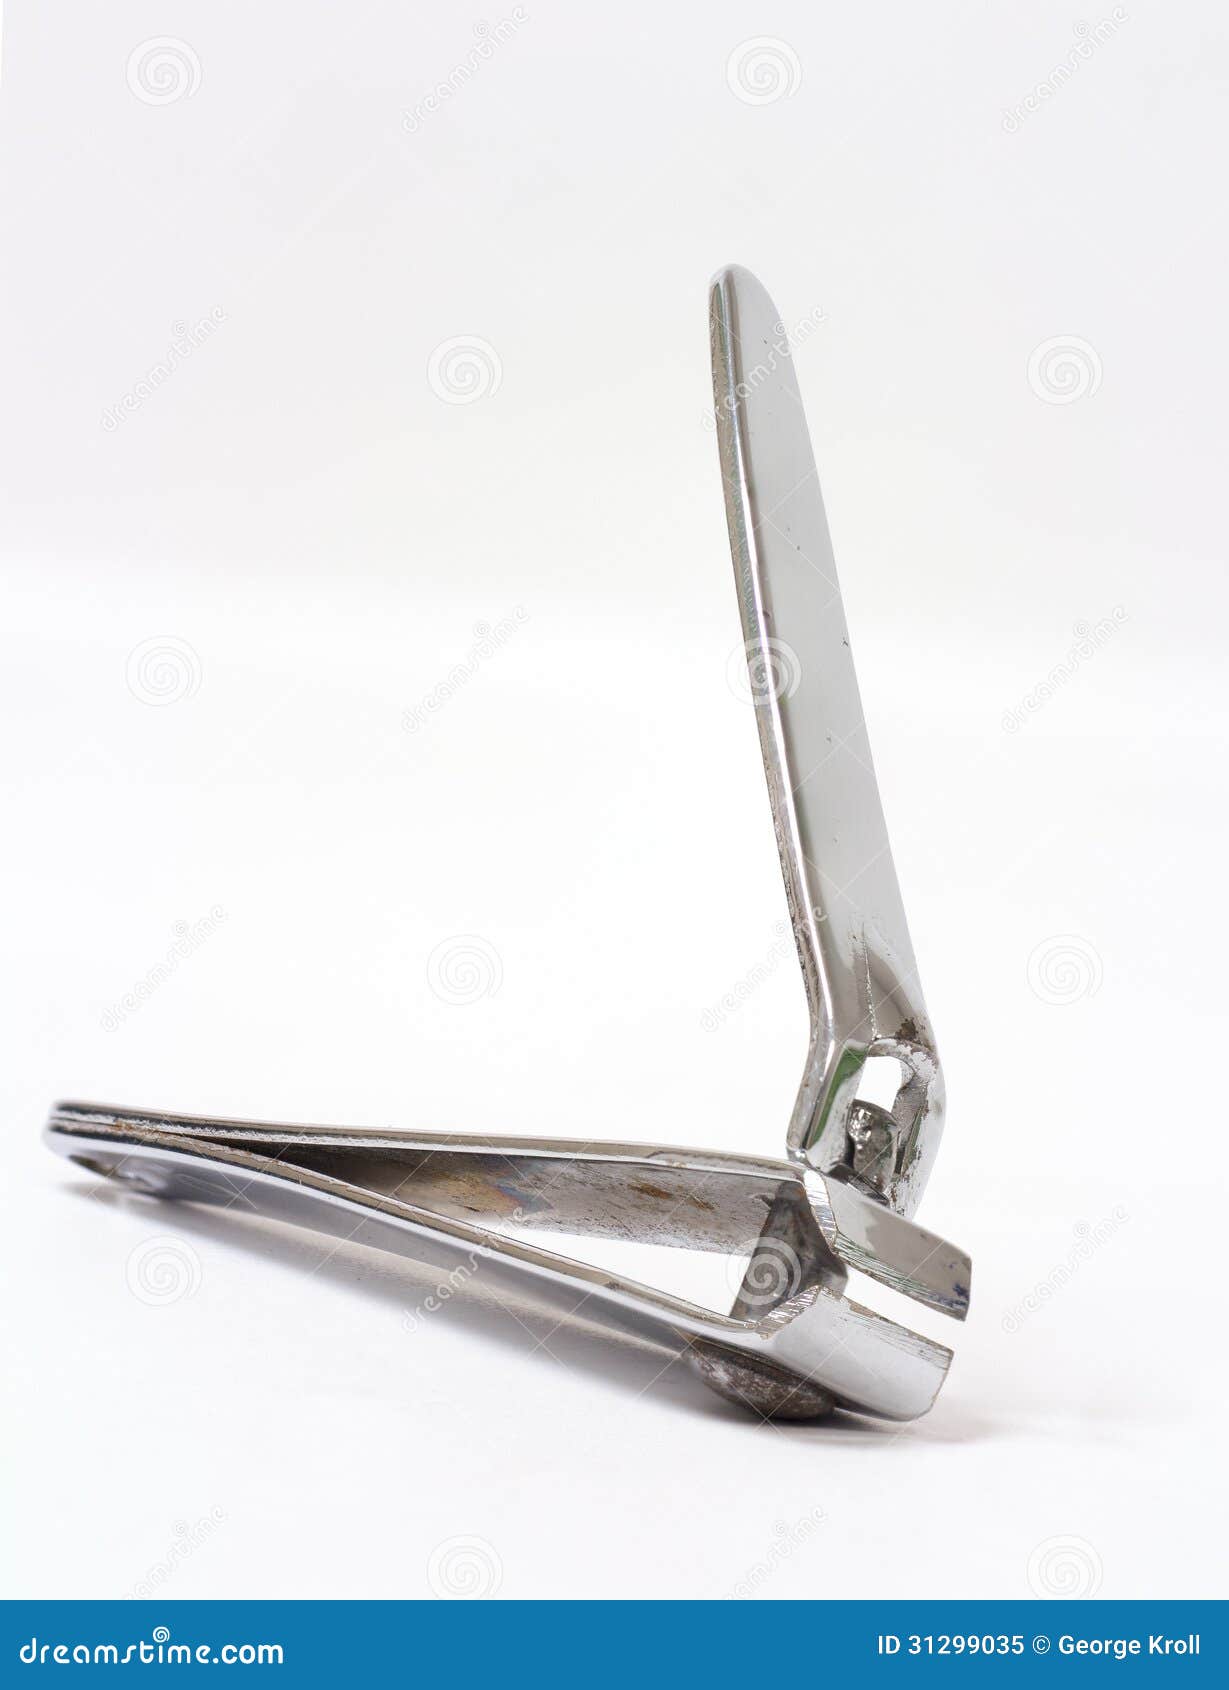 Old nail clipper stock image. Image of manicure, nail - 31299035